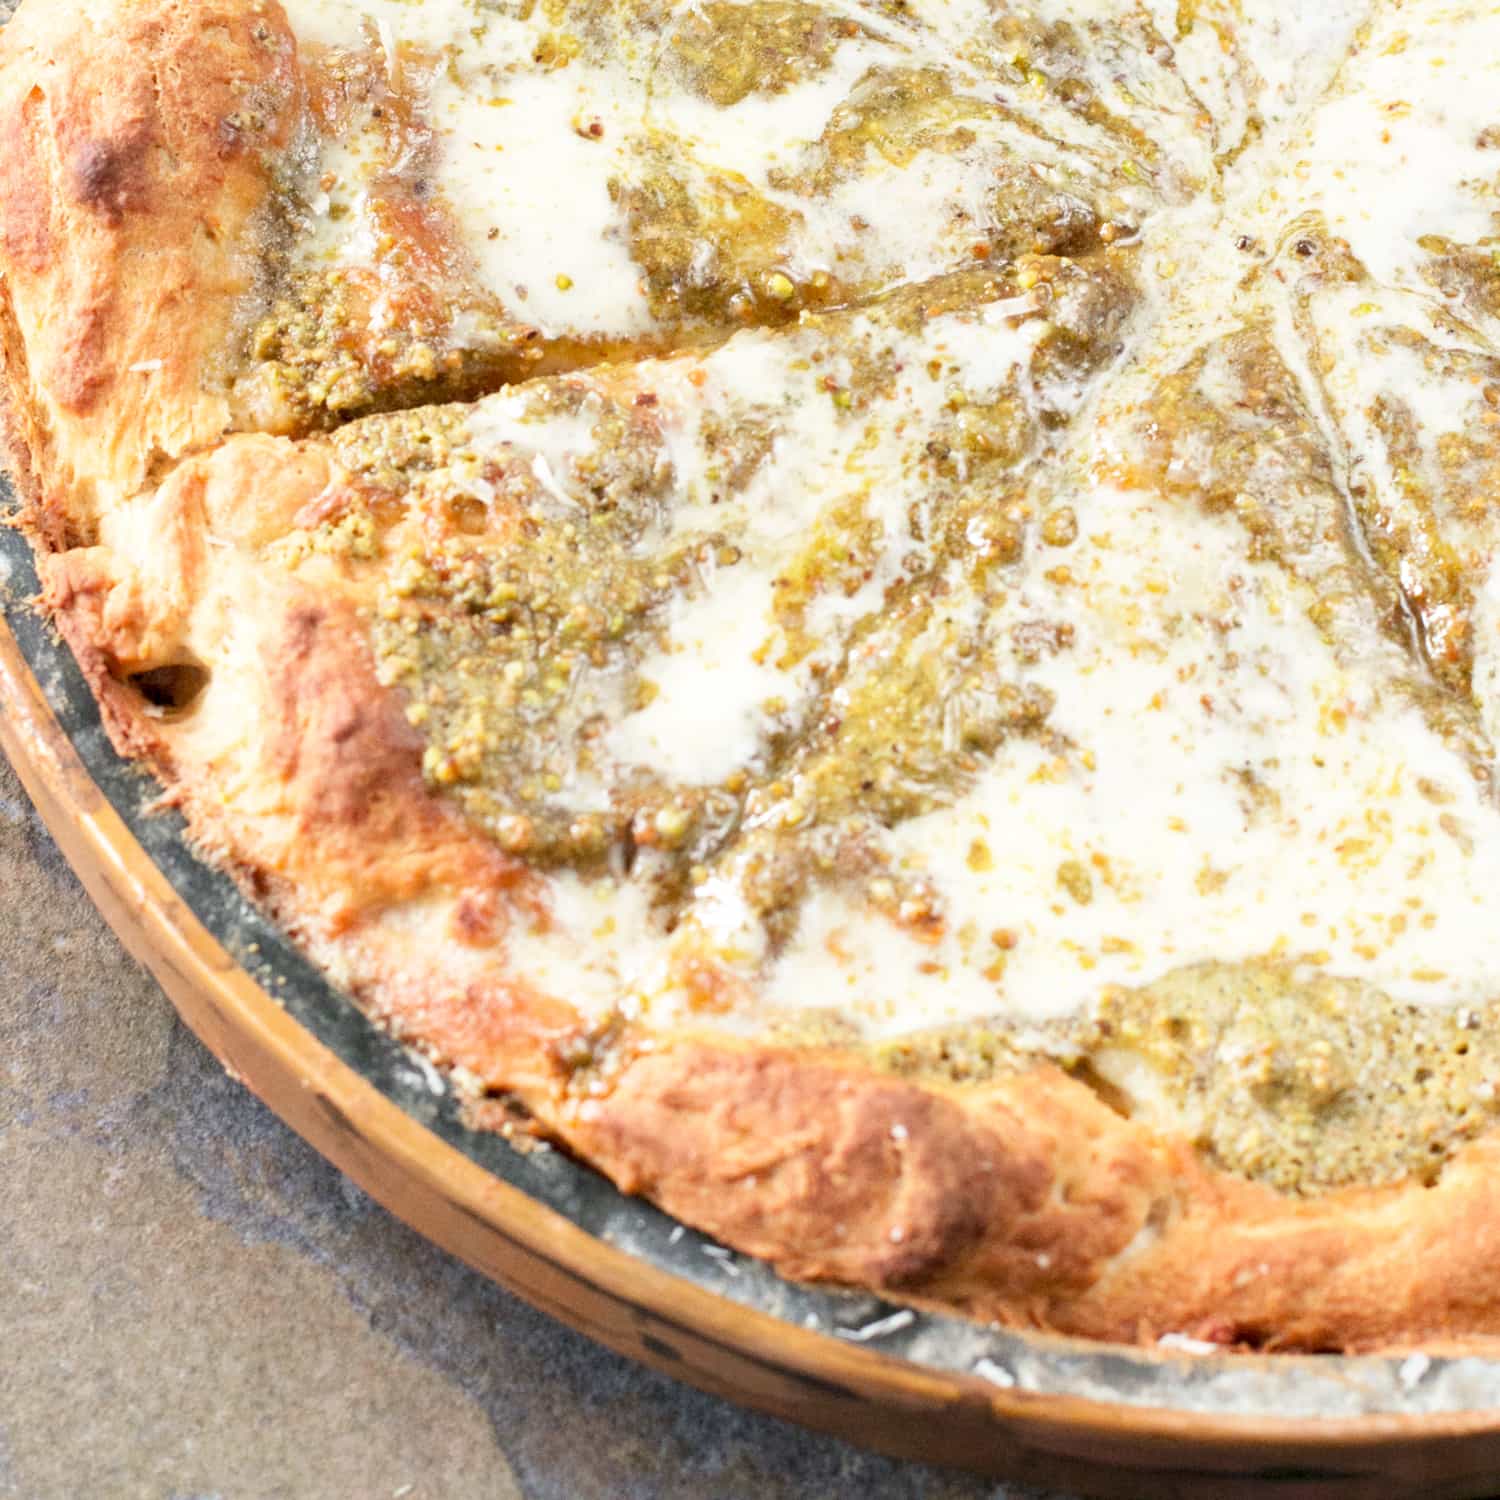 Pistachio Pesto Pizza with Crème Fraîche and Roasted Garlic (PLUS a KitchenAid Food Processor Giveaway!) | cakenknife.com